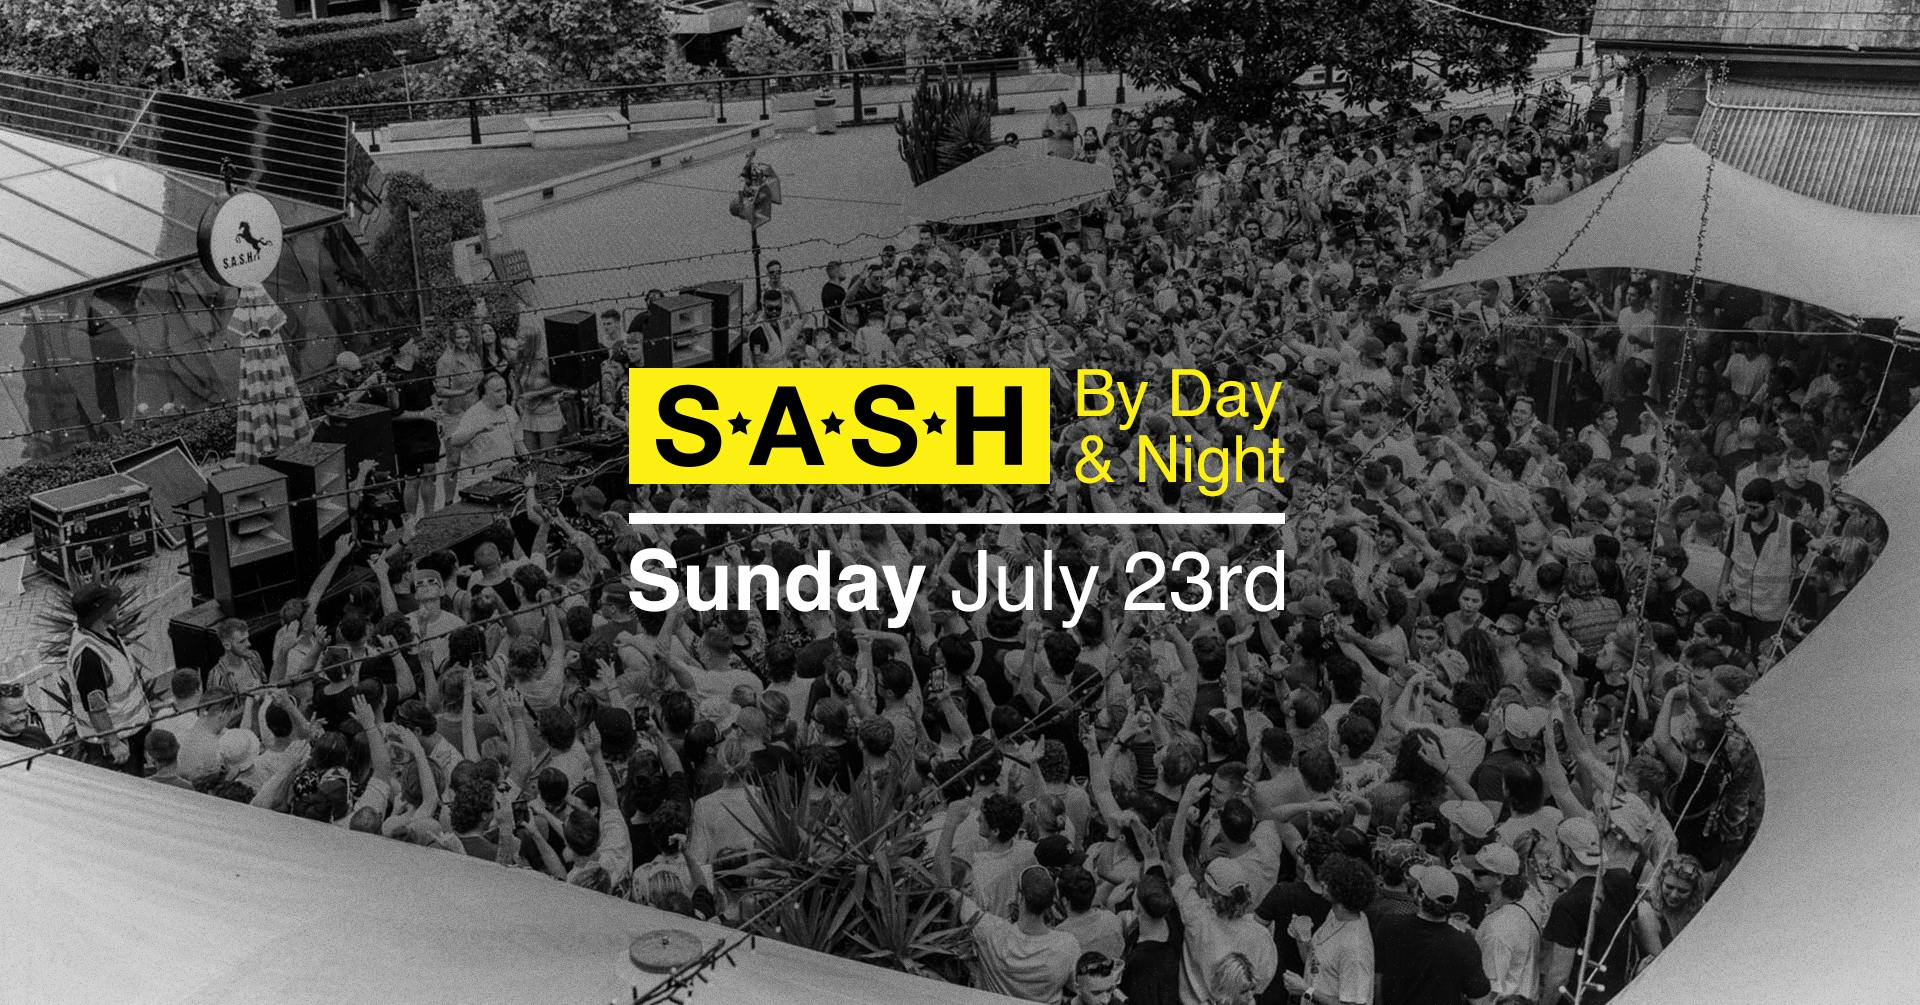 S.A.S.H By Day & Night July 23rd